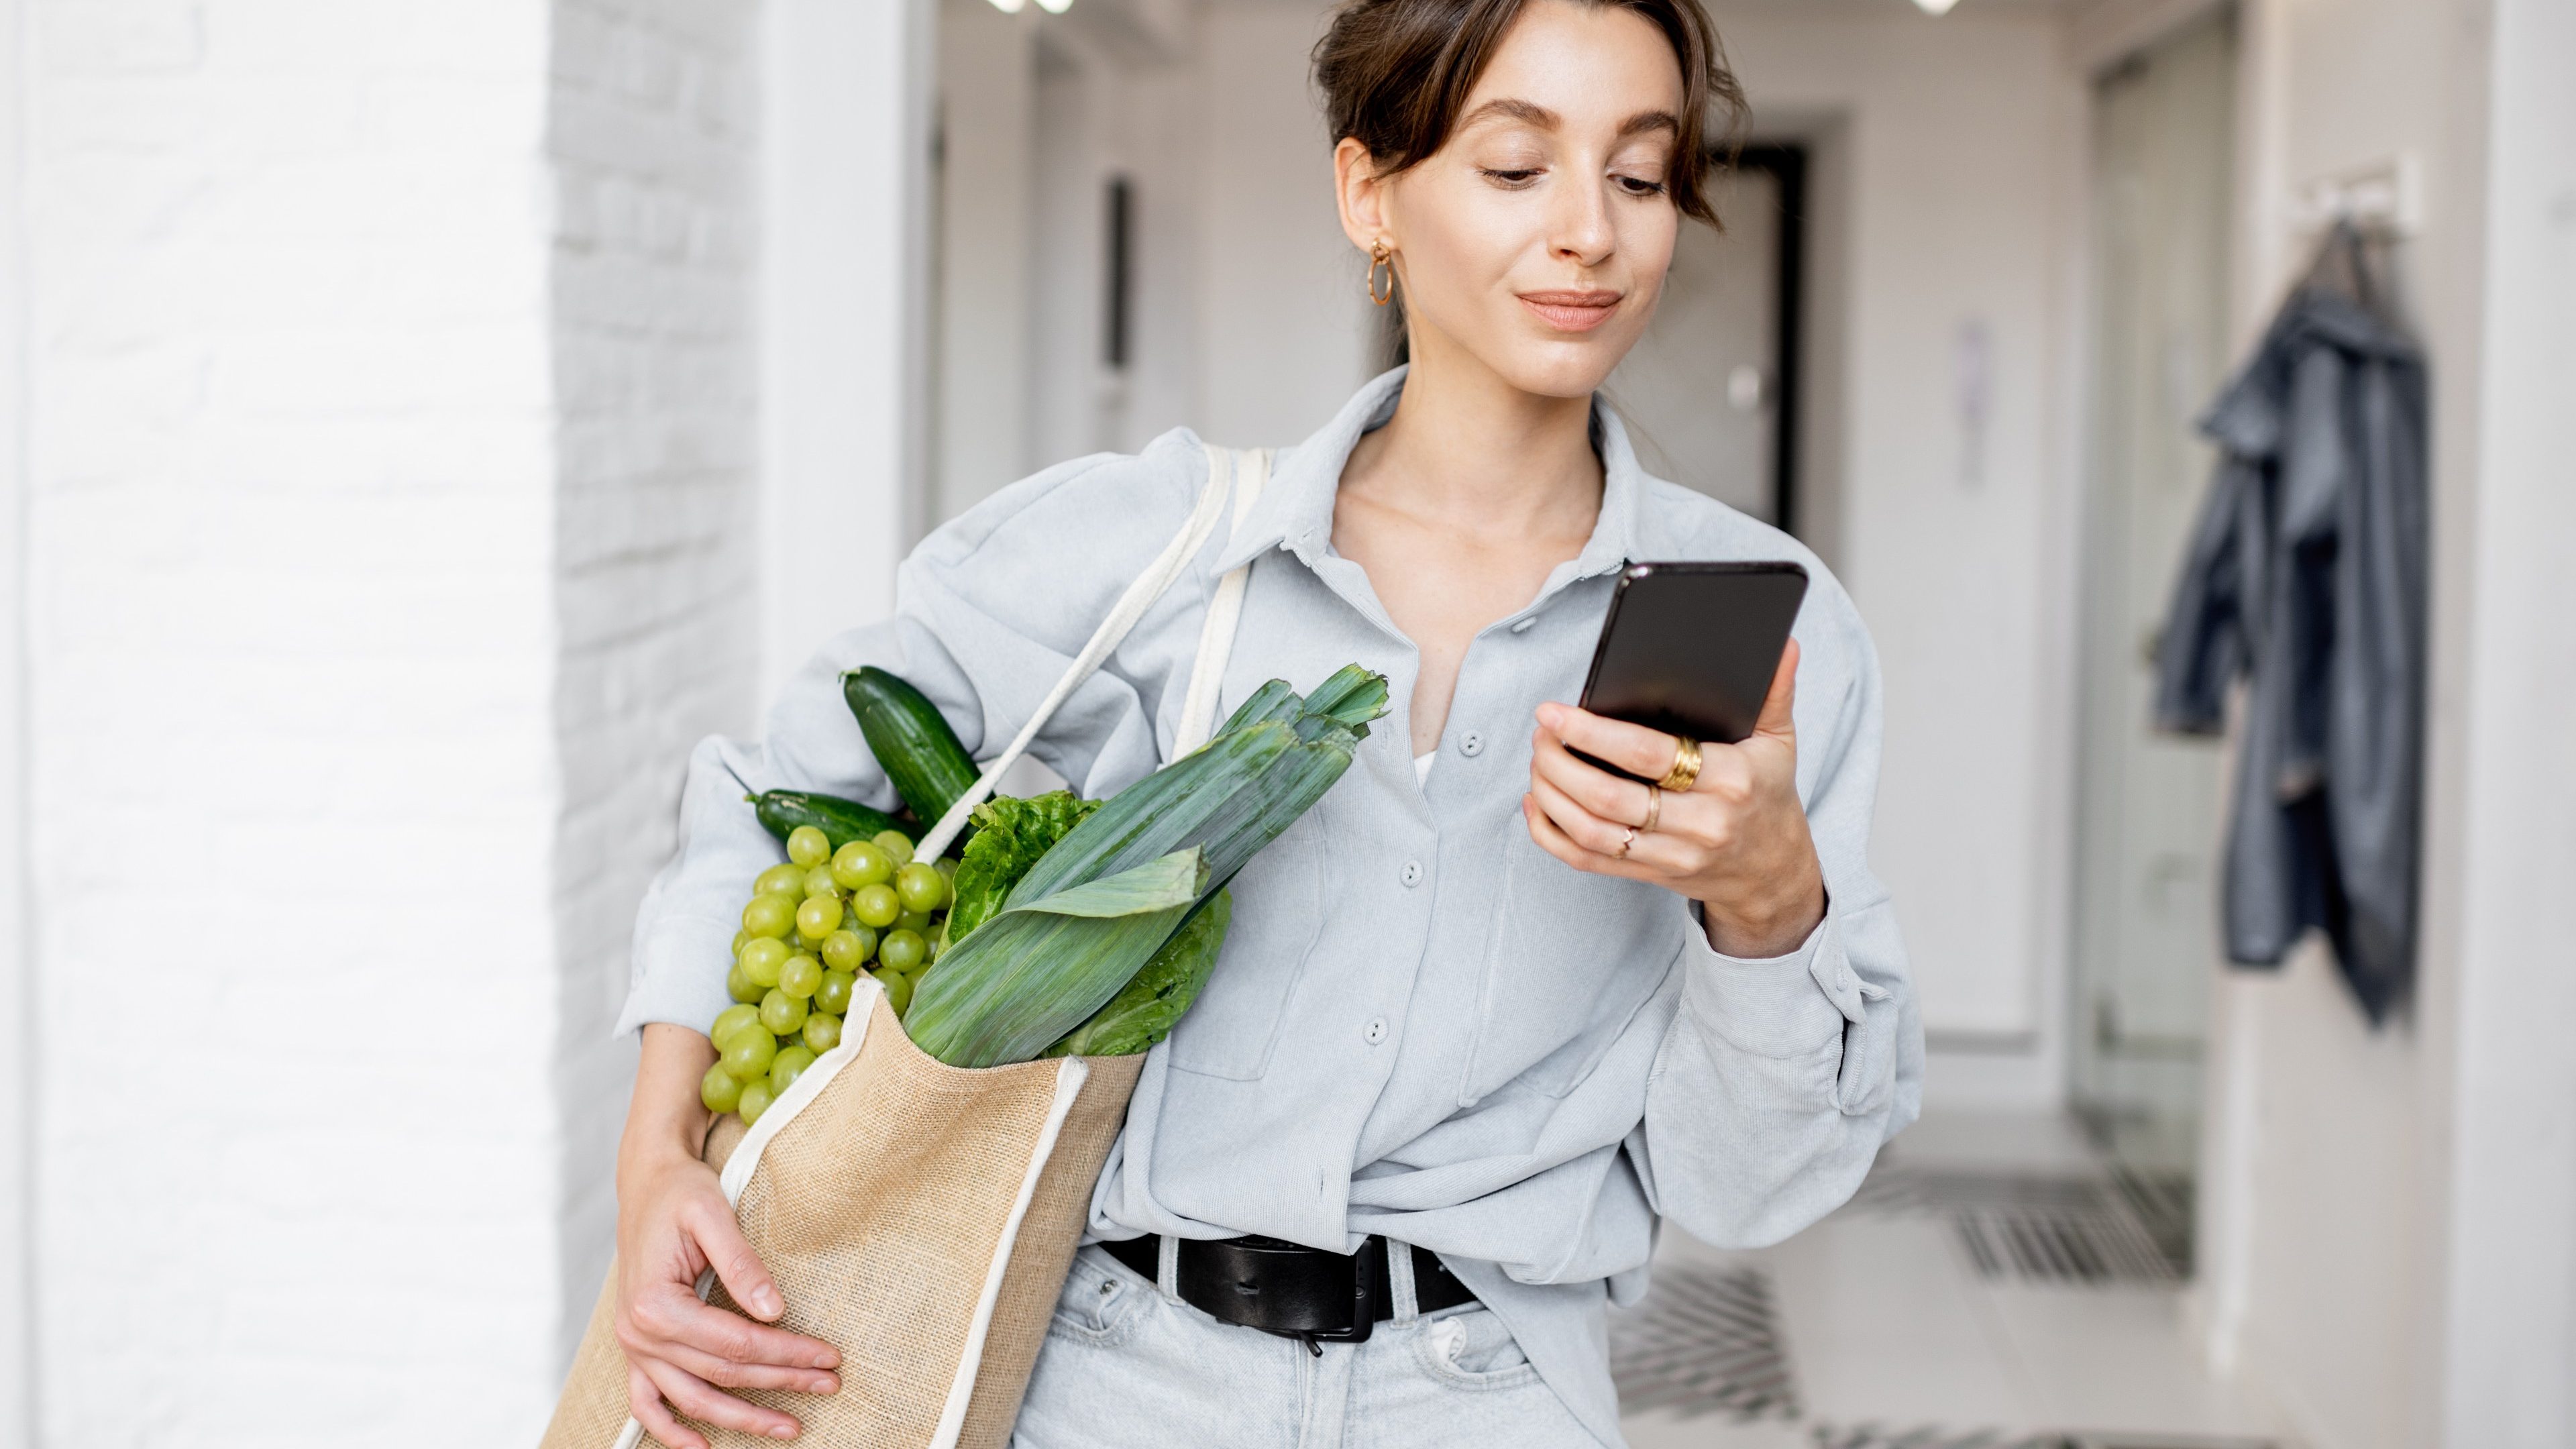 Portrait of a young and cheerful woman standing with mobile phone and shopping bag full of fresh food at home. Concept of buying products online